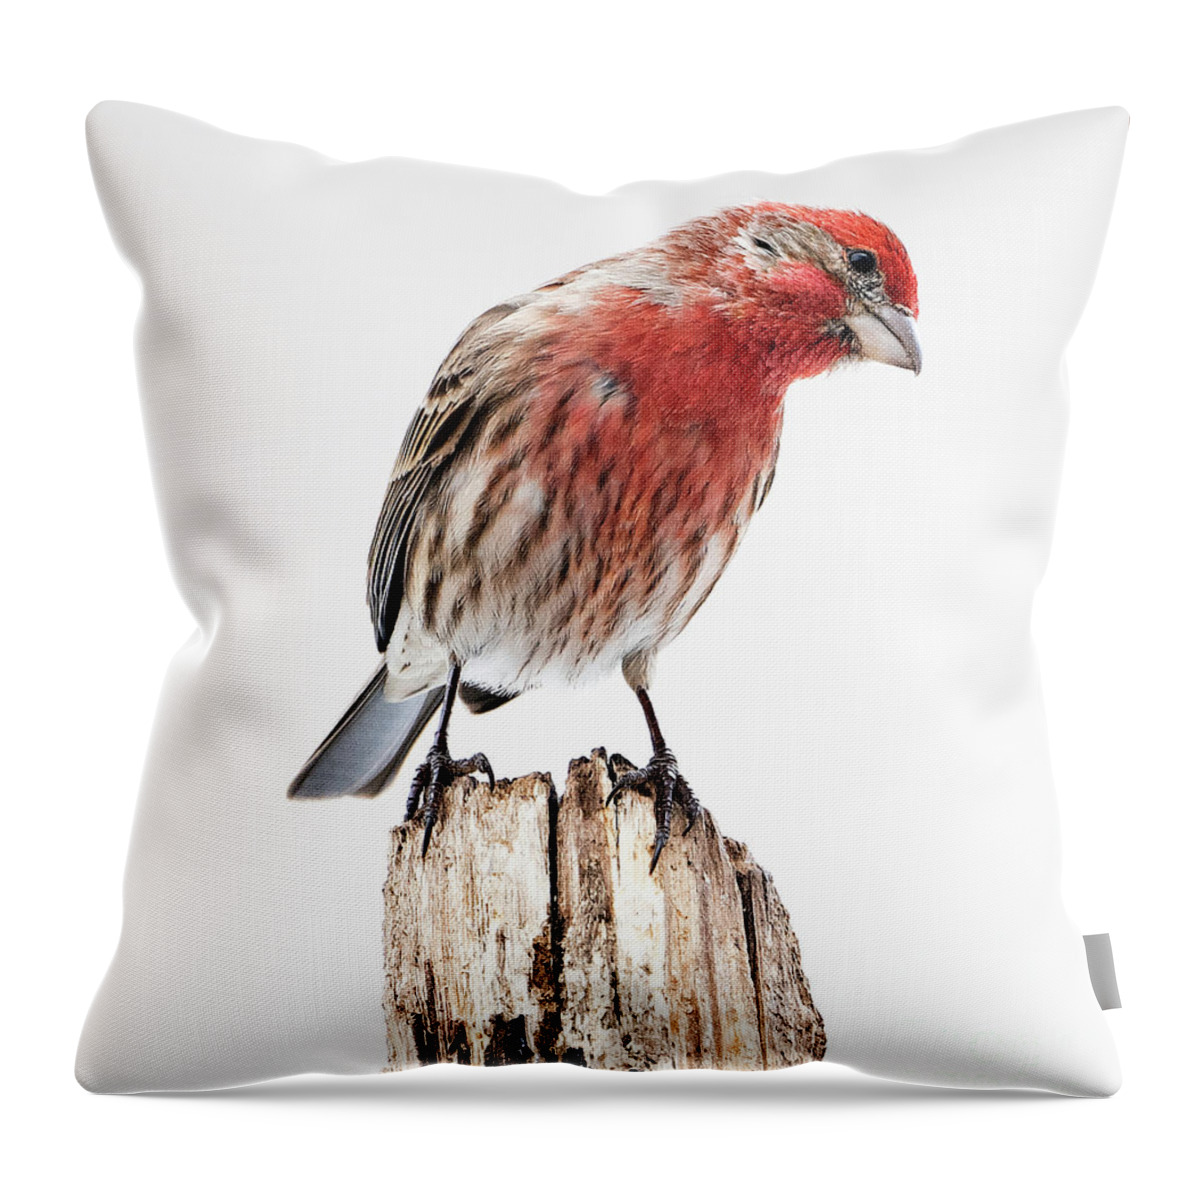 House Finch Throw Pillow featuring the photograph House Finch- So Curioius by Sandra Rust